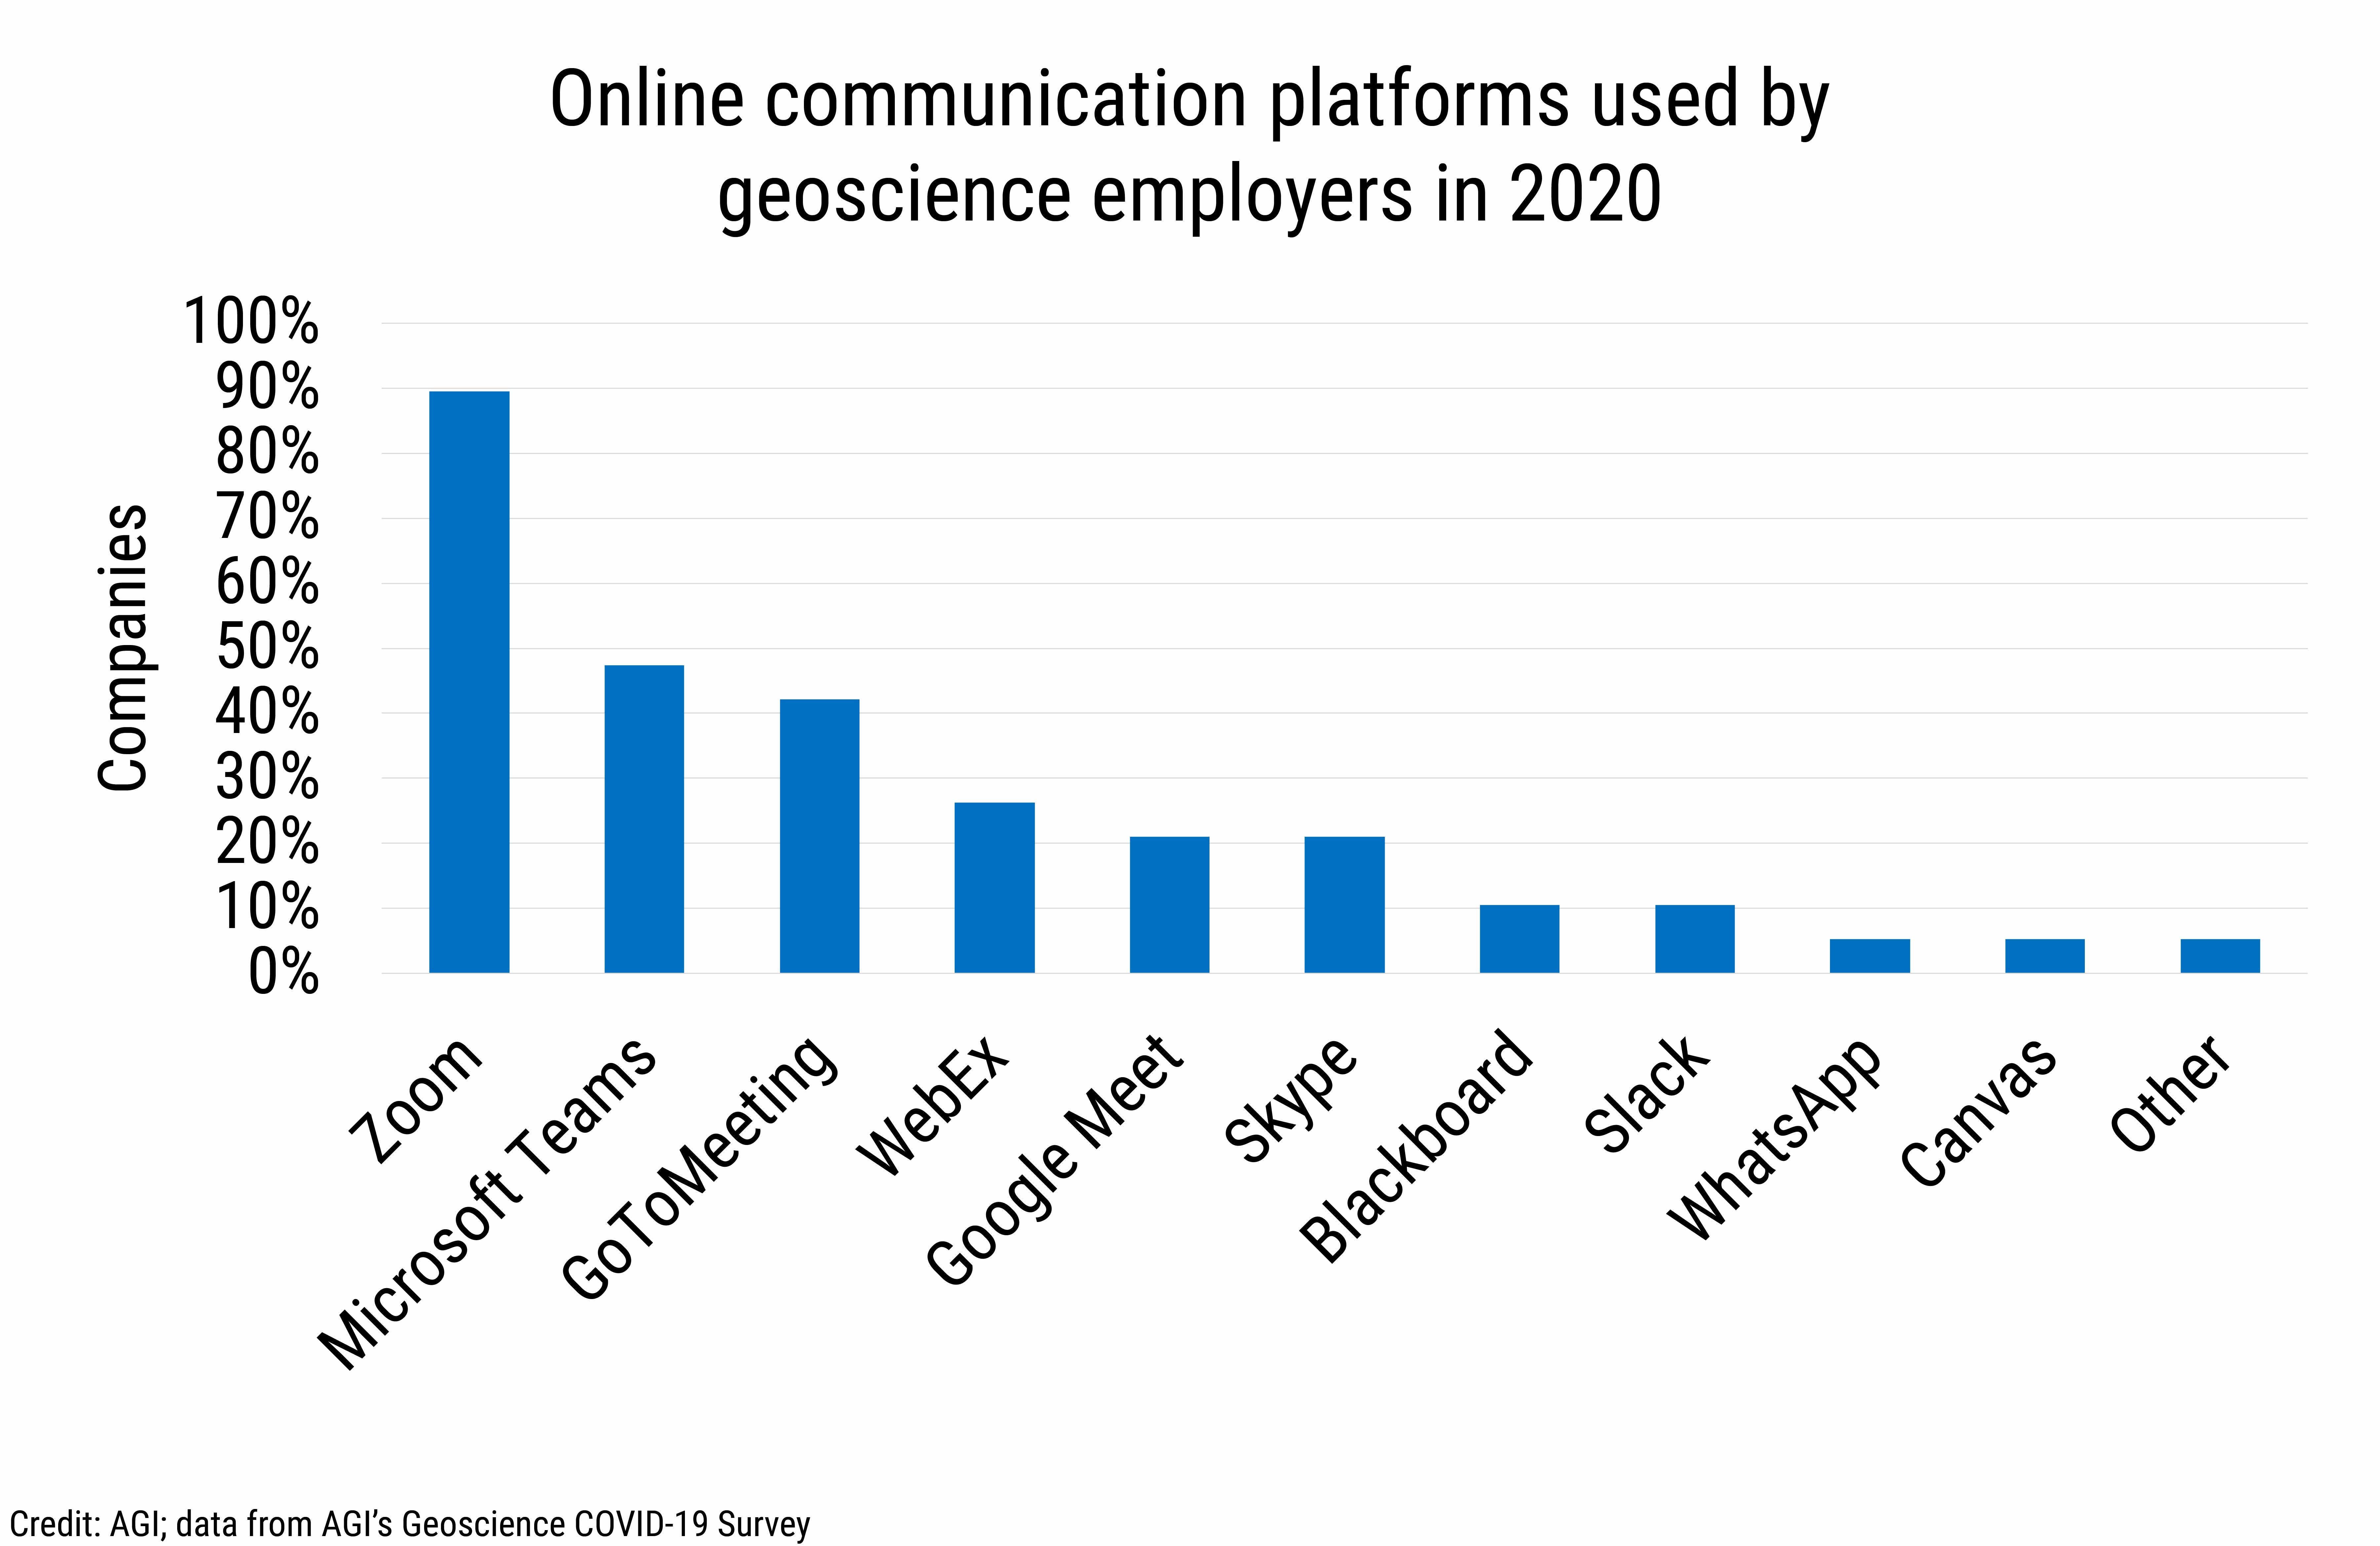 DB_2021-005_chart08: Online communication platforms used by geoscience employers in 2020 (Credit: AGI; data from AGI's Geoscience COVID-19 Survey)